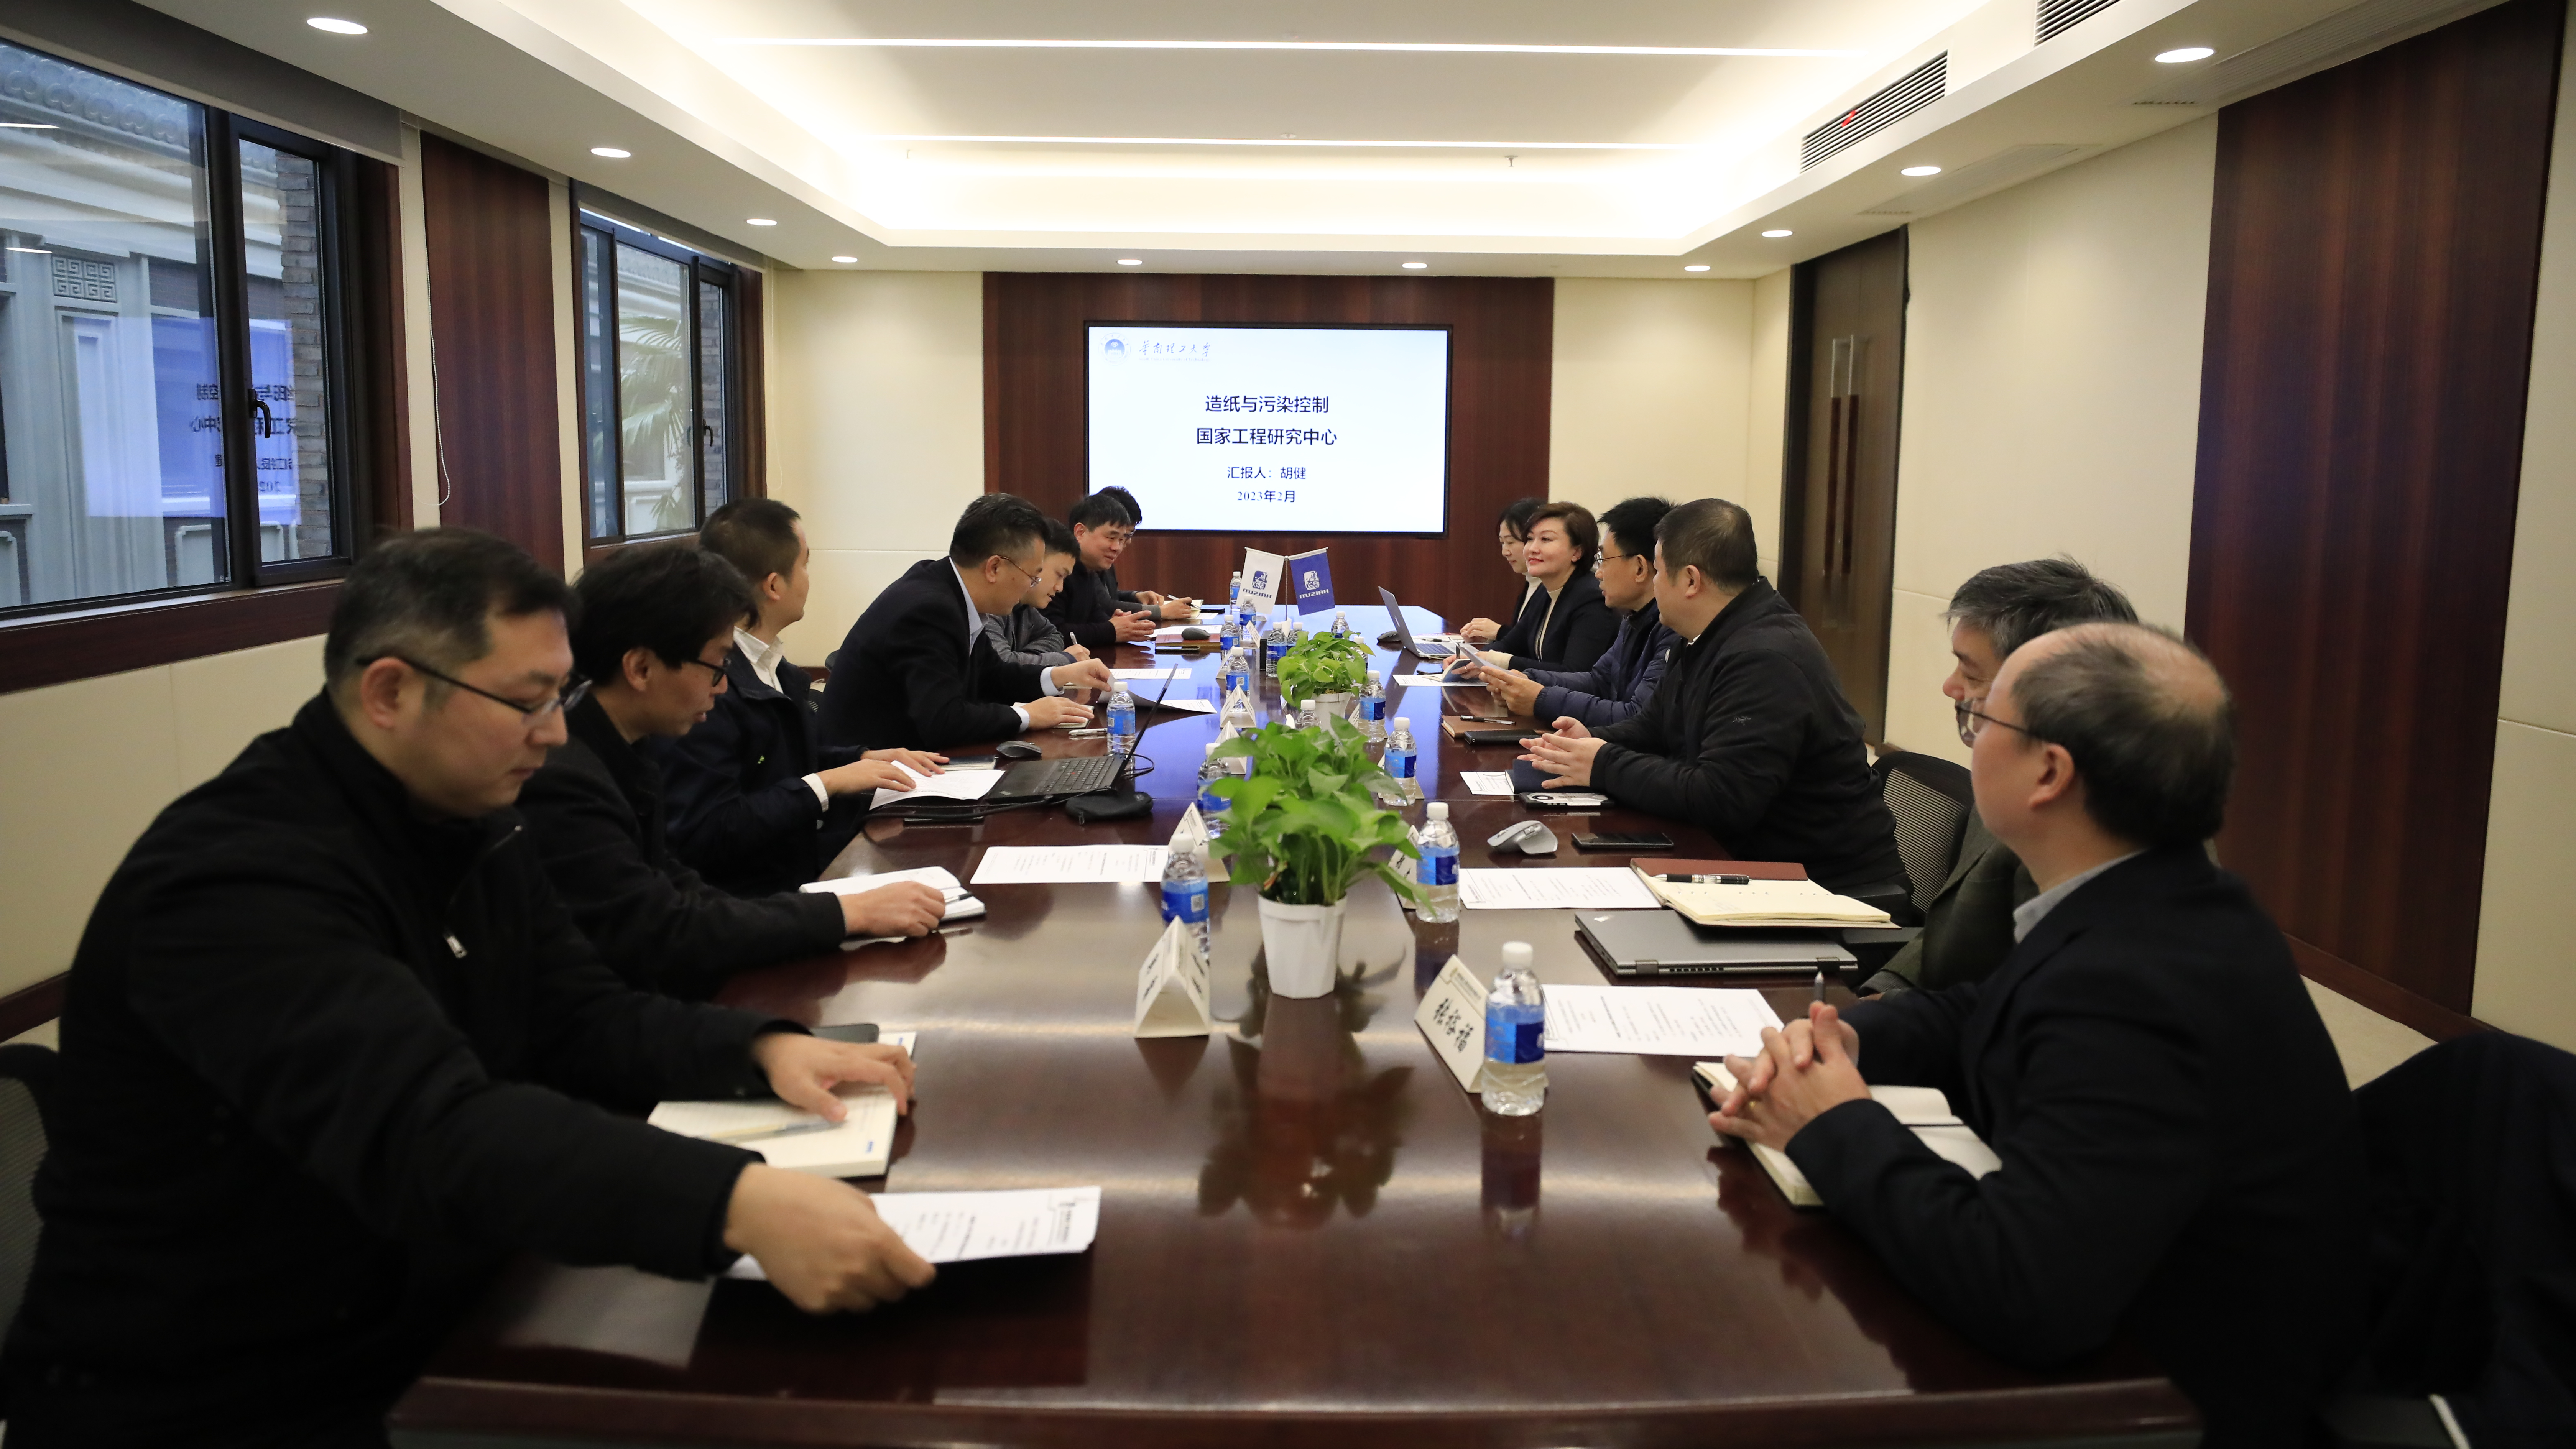 Work Exchange between China Haisum and National Engineering Research Center for Papermaking and Pollution Control, South China University of Technology